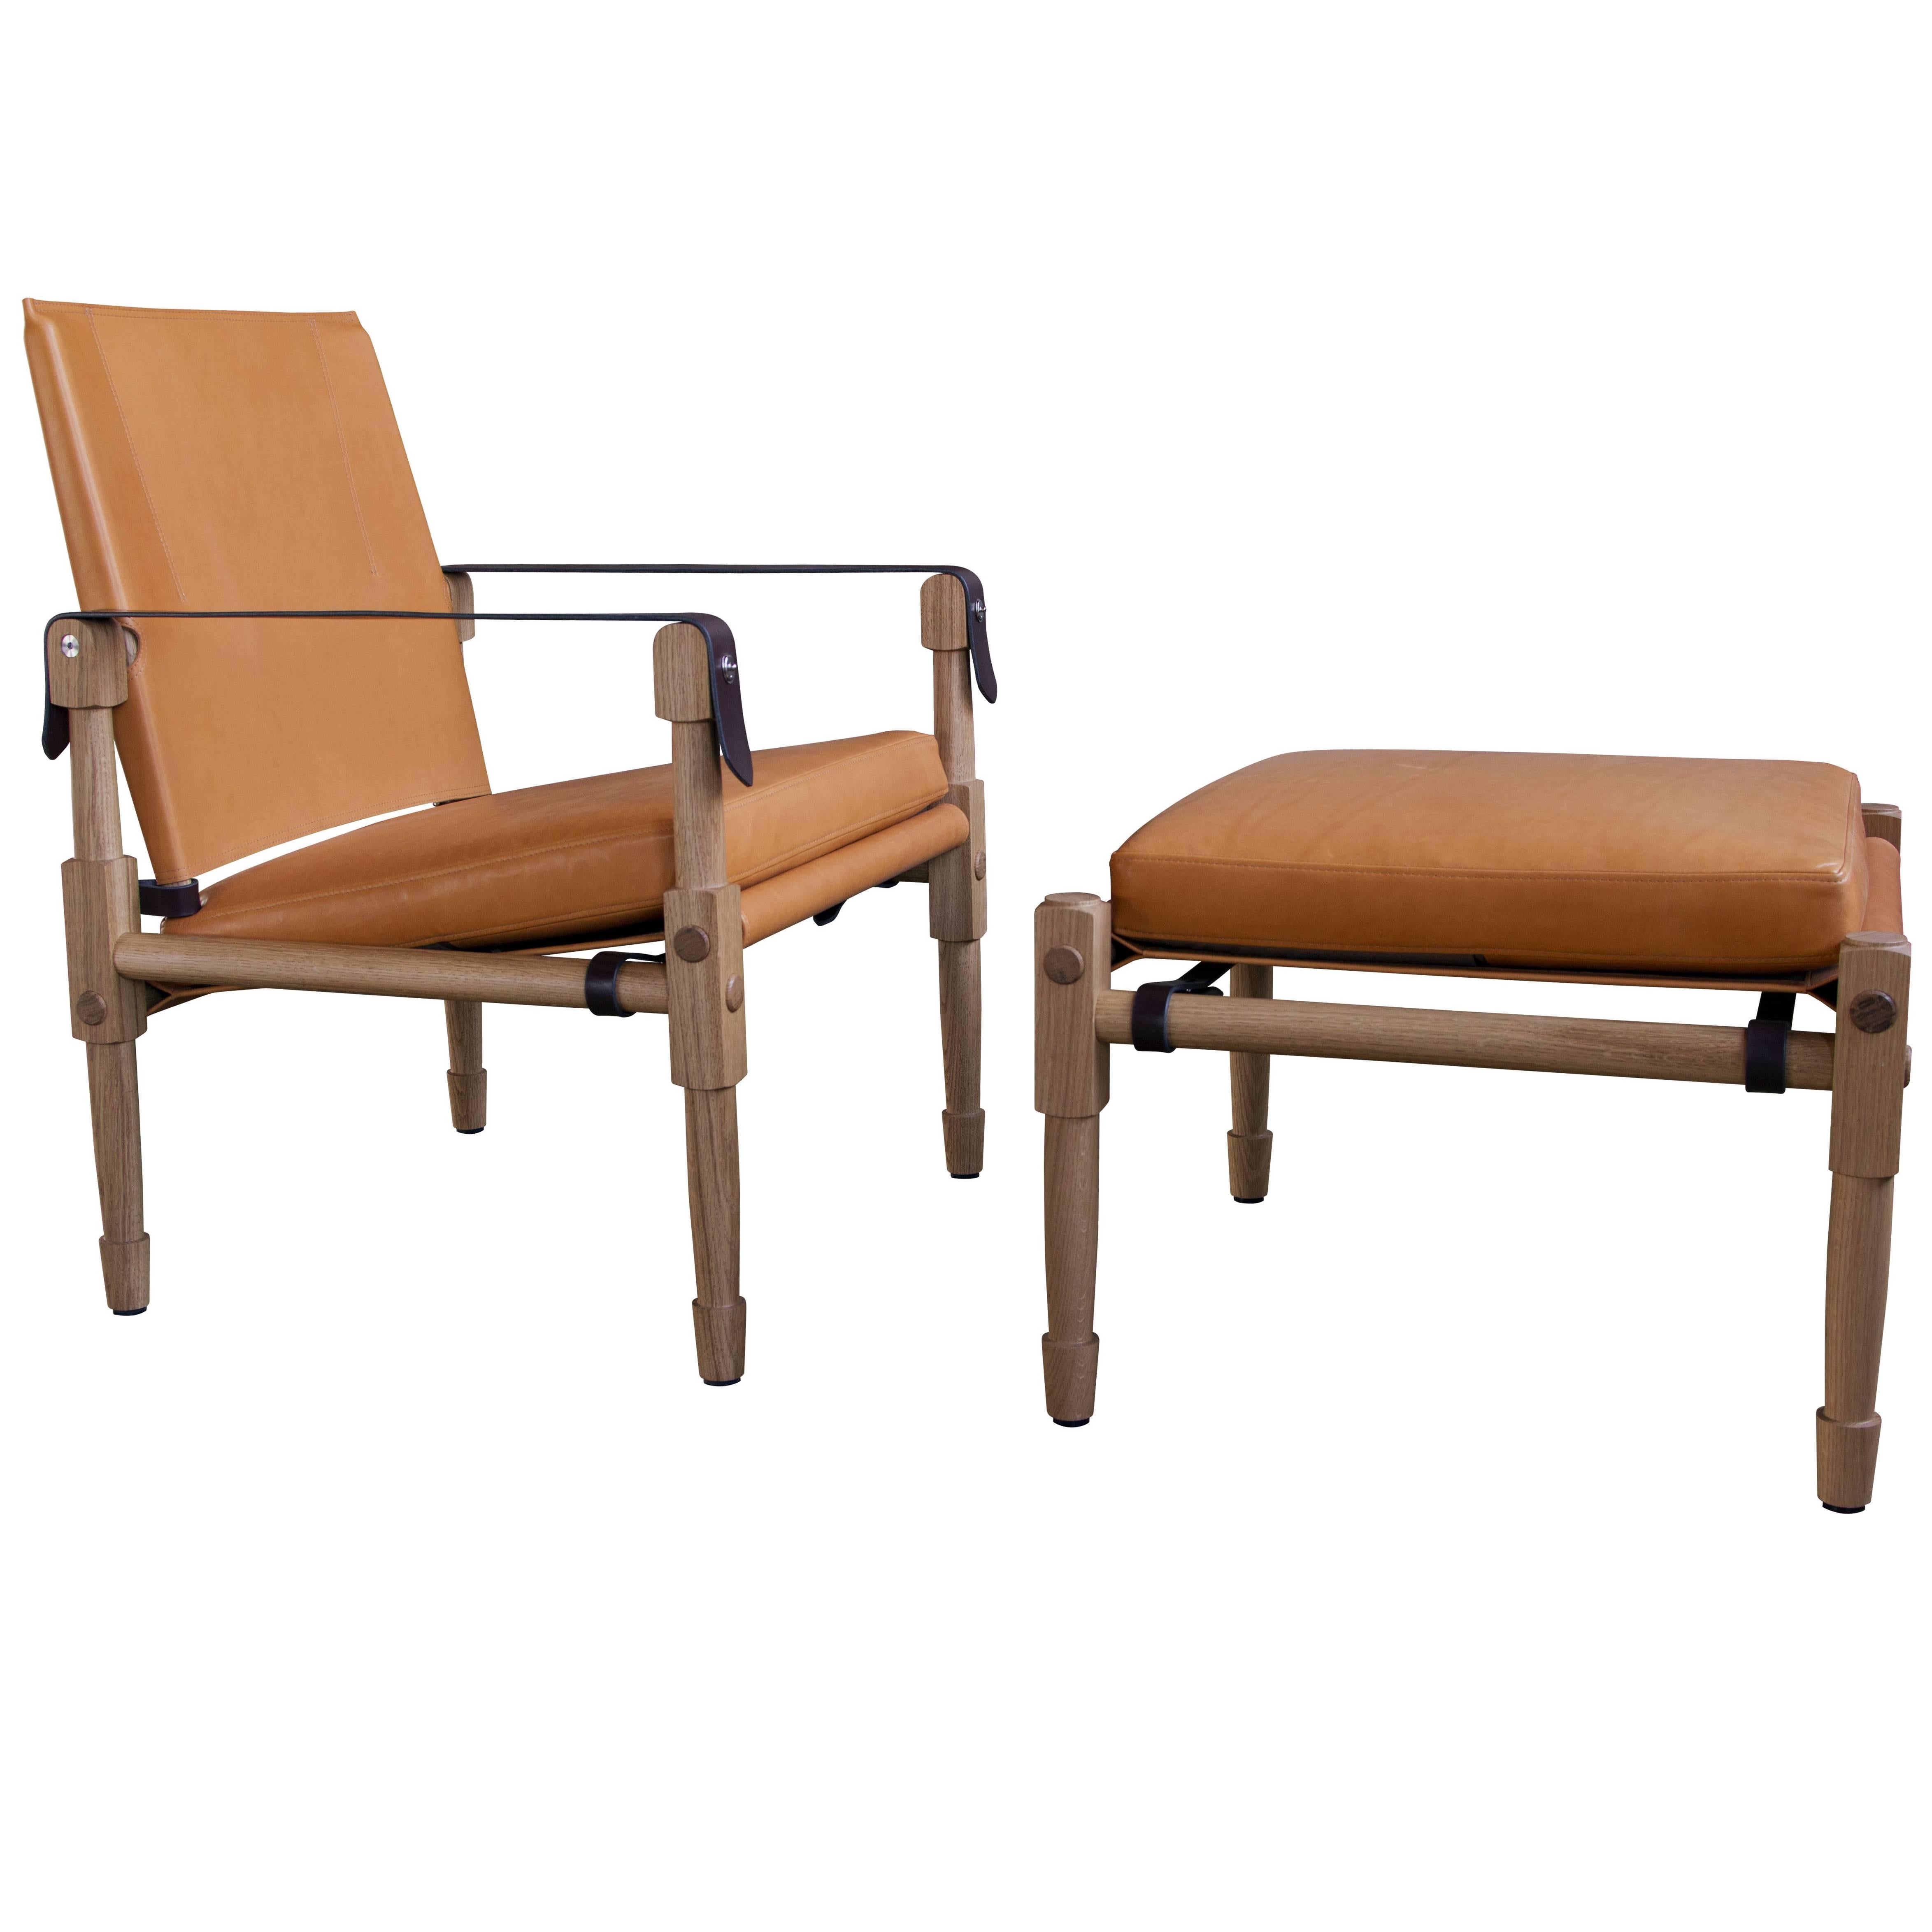 Grand Chatwin Lounge Chair and Ottoman- handcrafted by Richard Wrightman Design